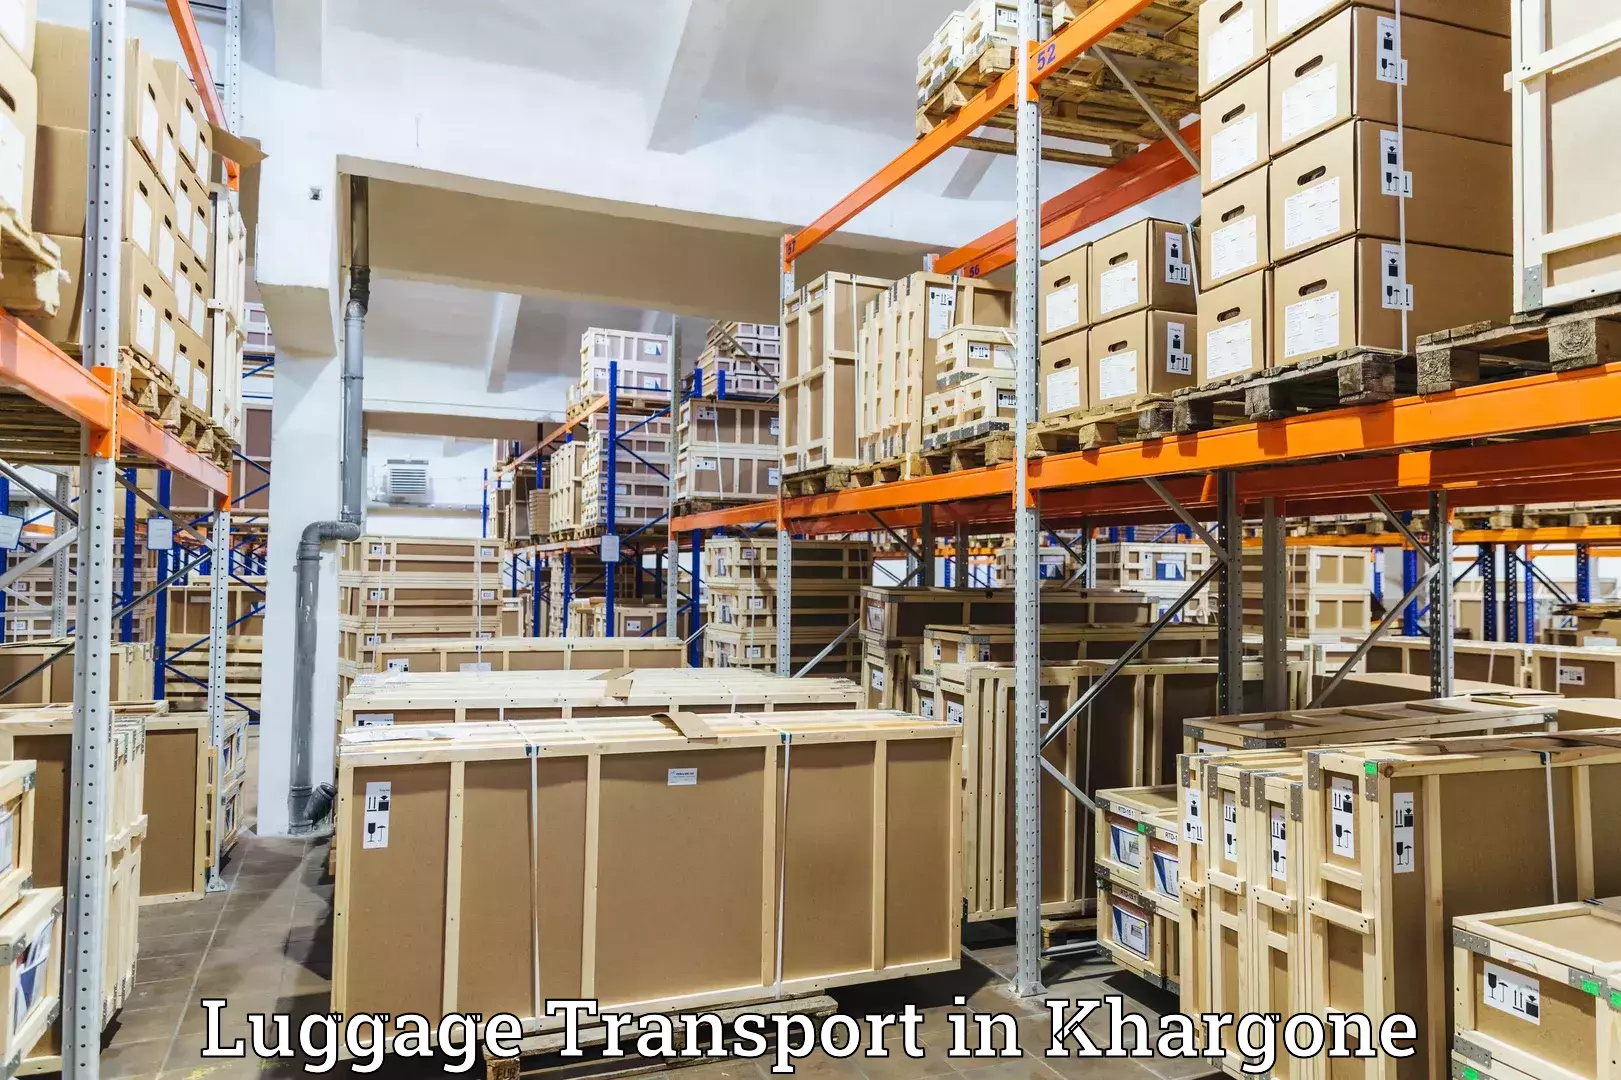 Baggage transport technology in Khargone